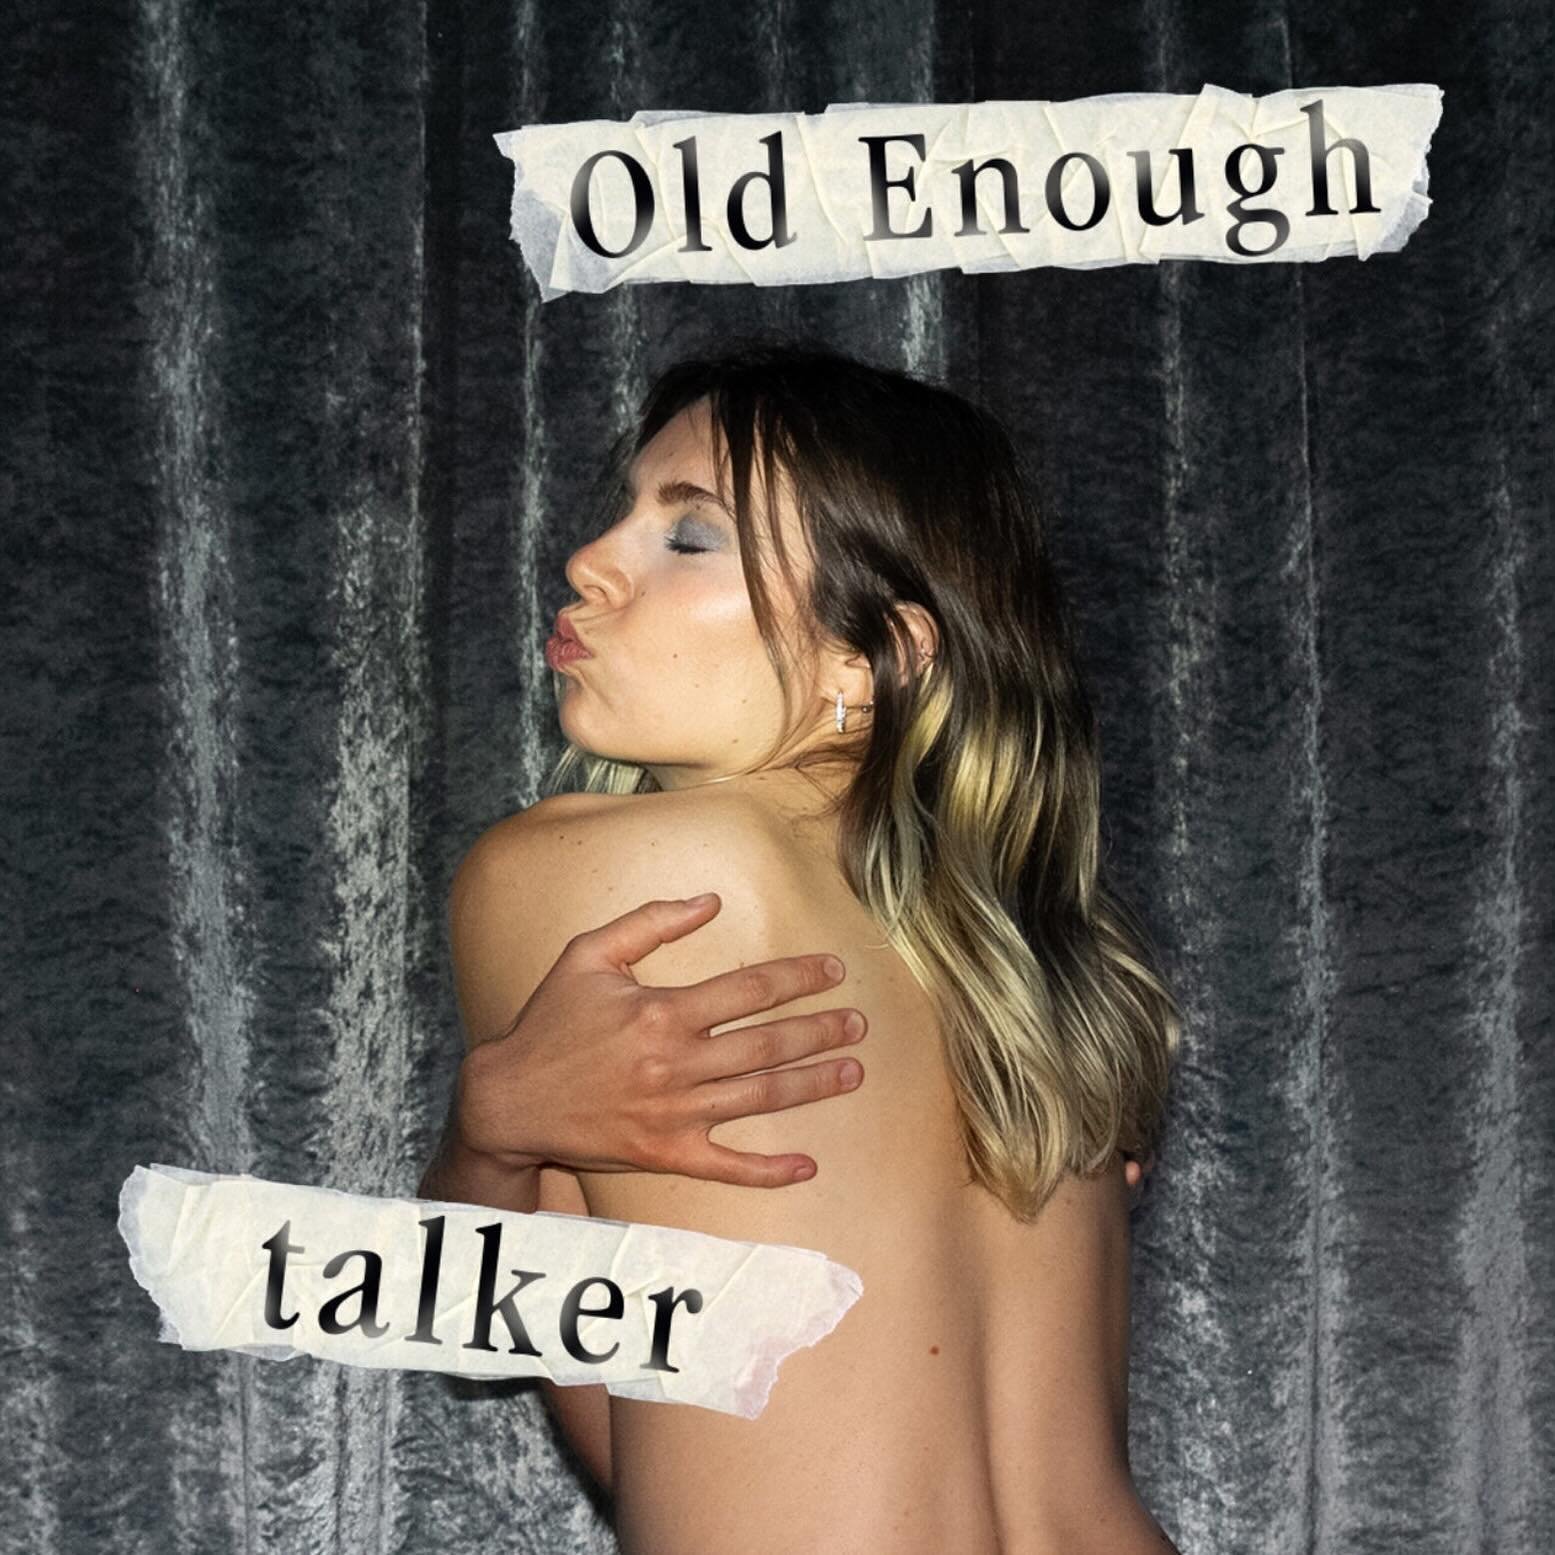 @talkerceleste - &quot;Old Enough&quot;
Written by @talkerceleste &amp; @aidanhogg 
Produced by @aidanhogg 
Drums by @zachdoesdrums 
Mixed by @collinpastore 
Mastered by me 🦚